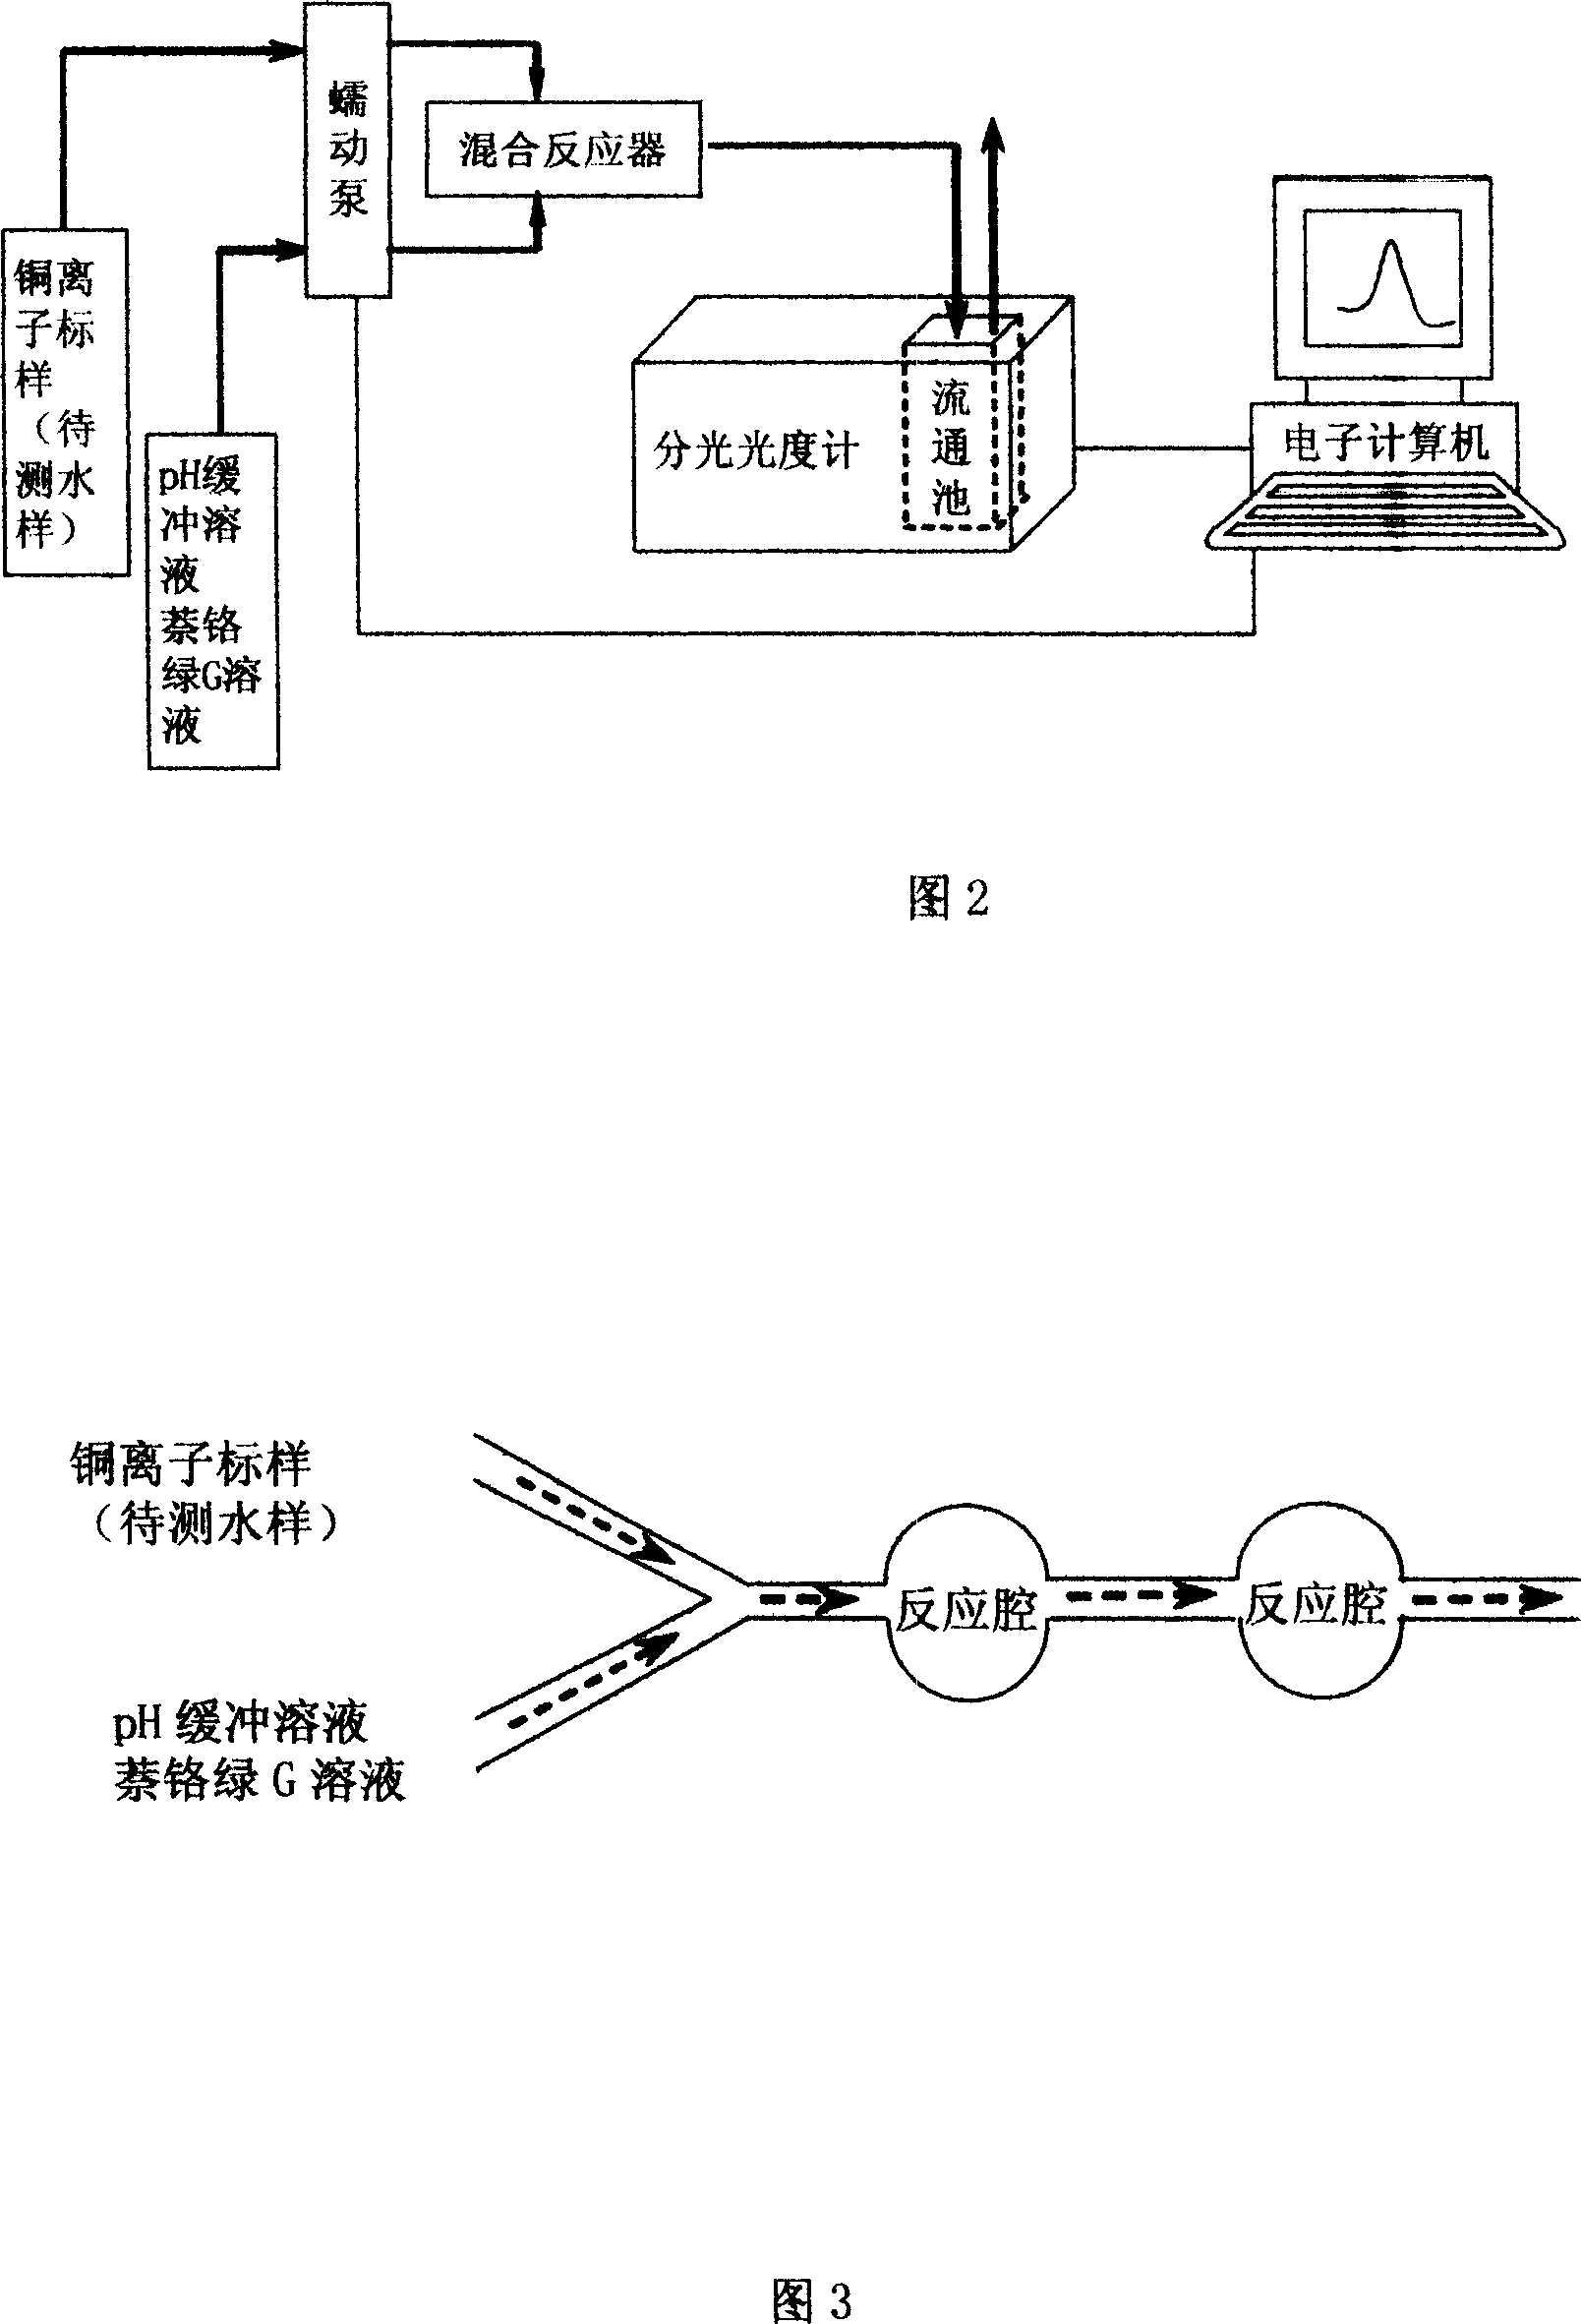 Method for measuring trace copper ion by using light absorption ratio difference and continuous-flow